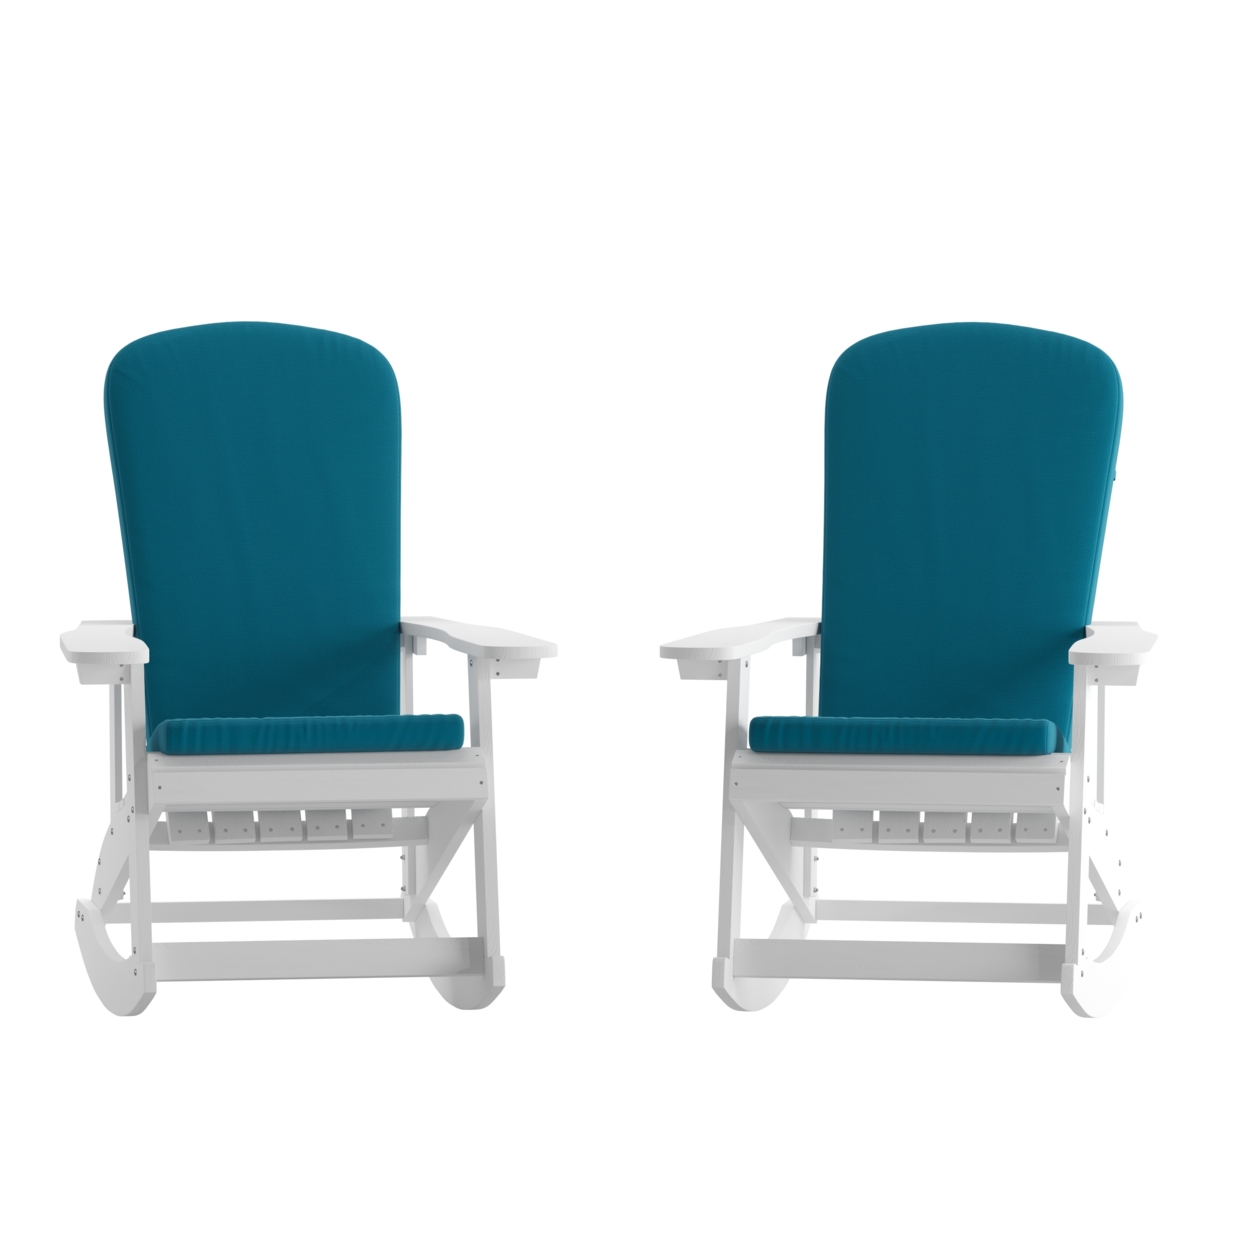 2 Piece Chairs, Adirondack, Teal Blue Removable Cover Cushions, Straps